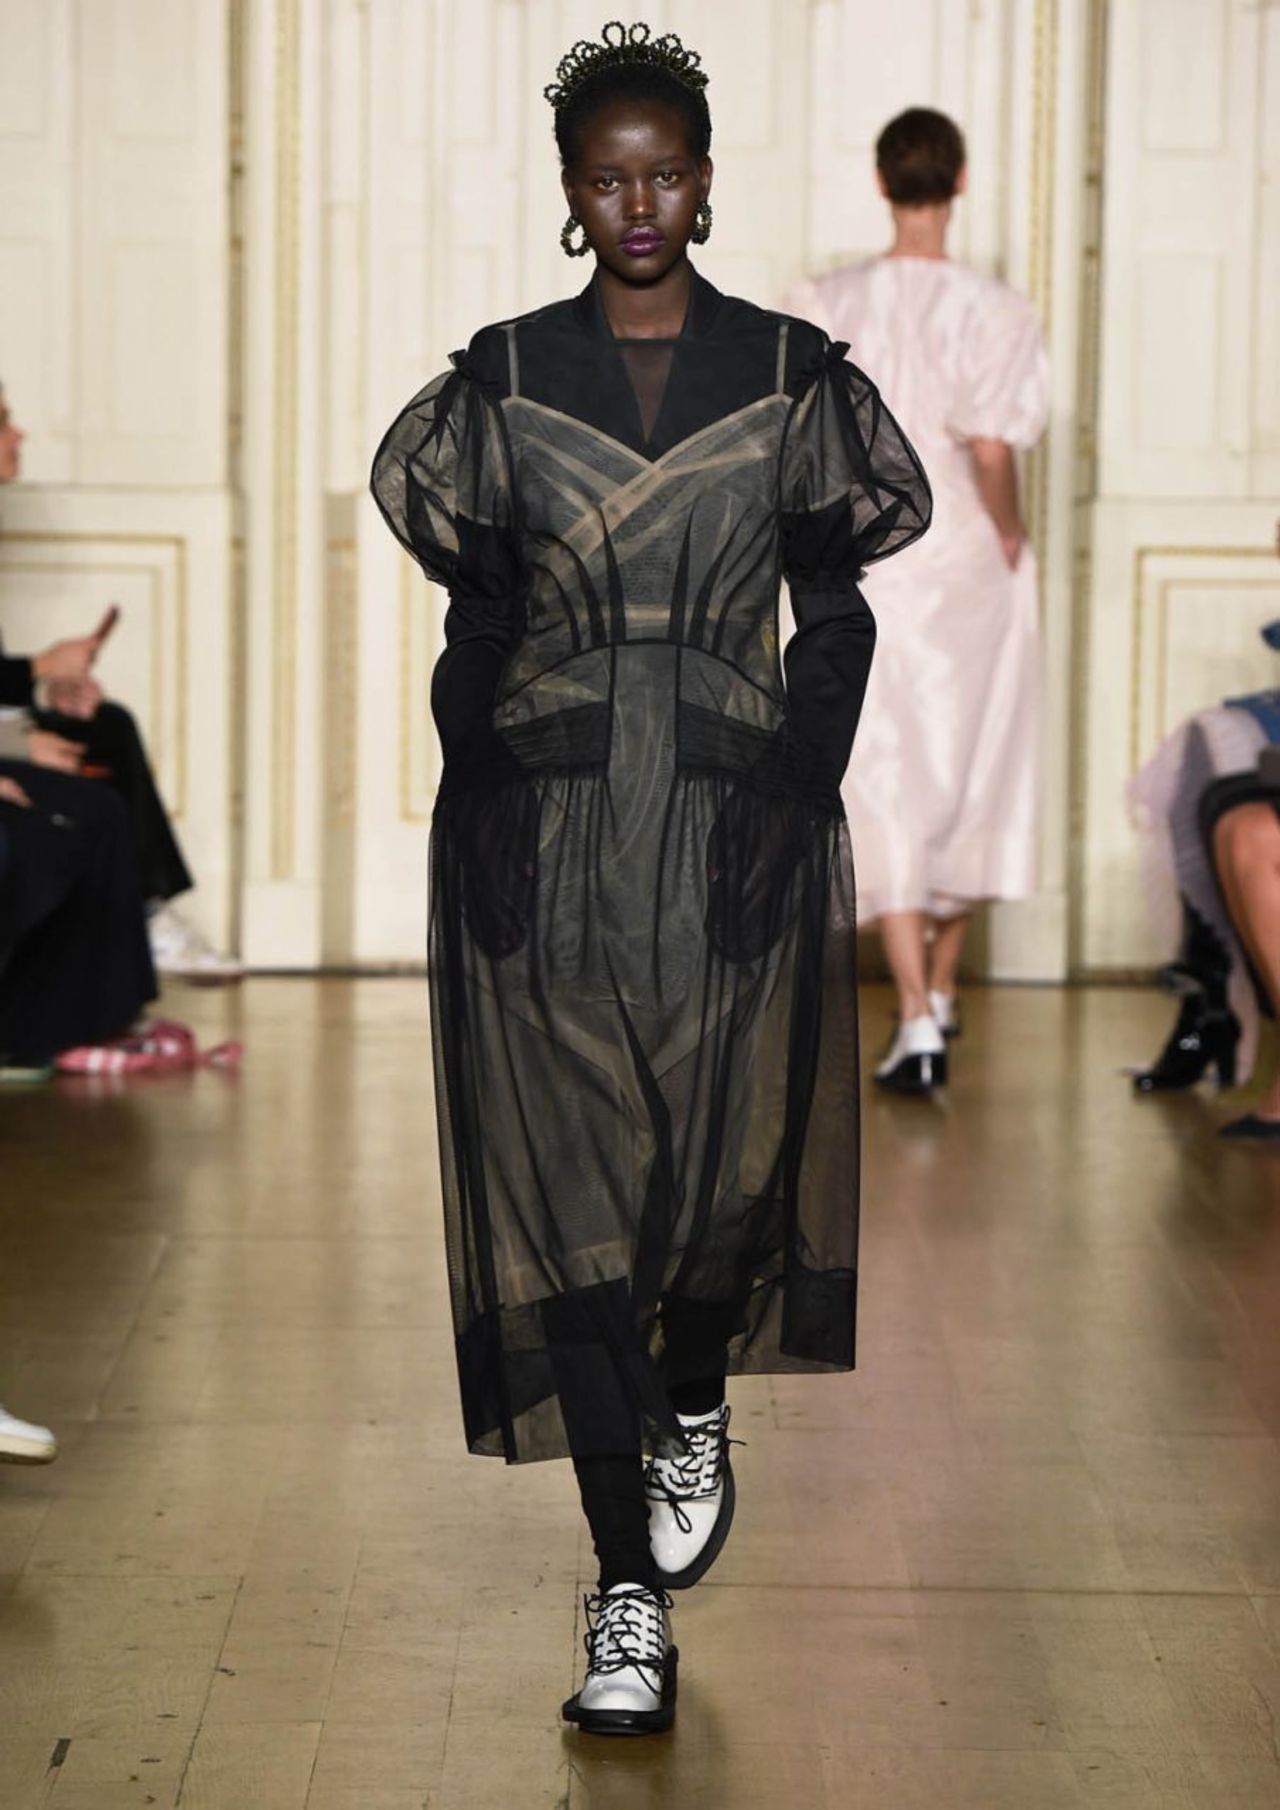 Simone Rocha's show at the Royal Academy of Arts championed female diversity and empowerment.